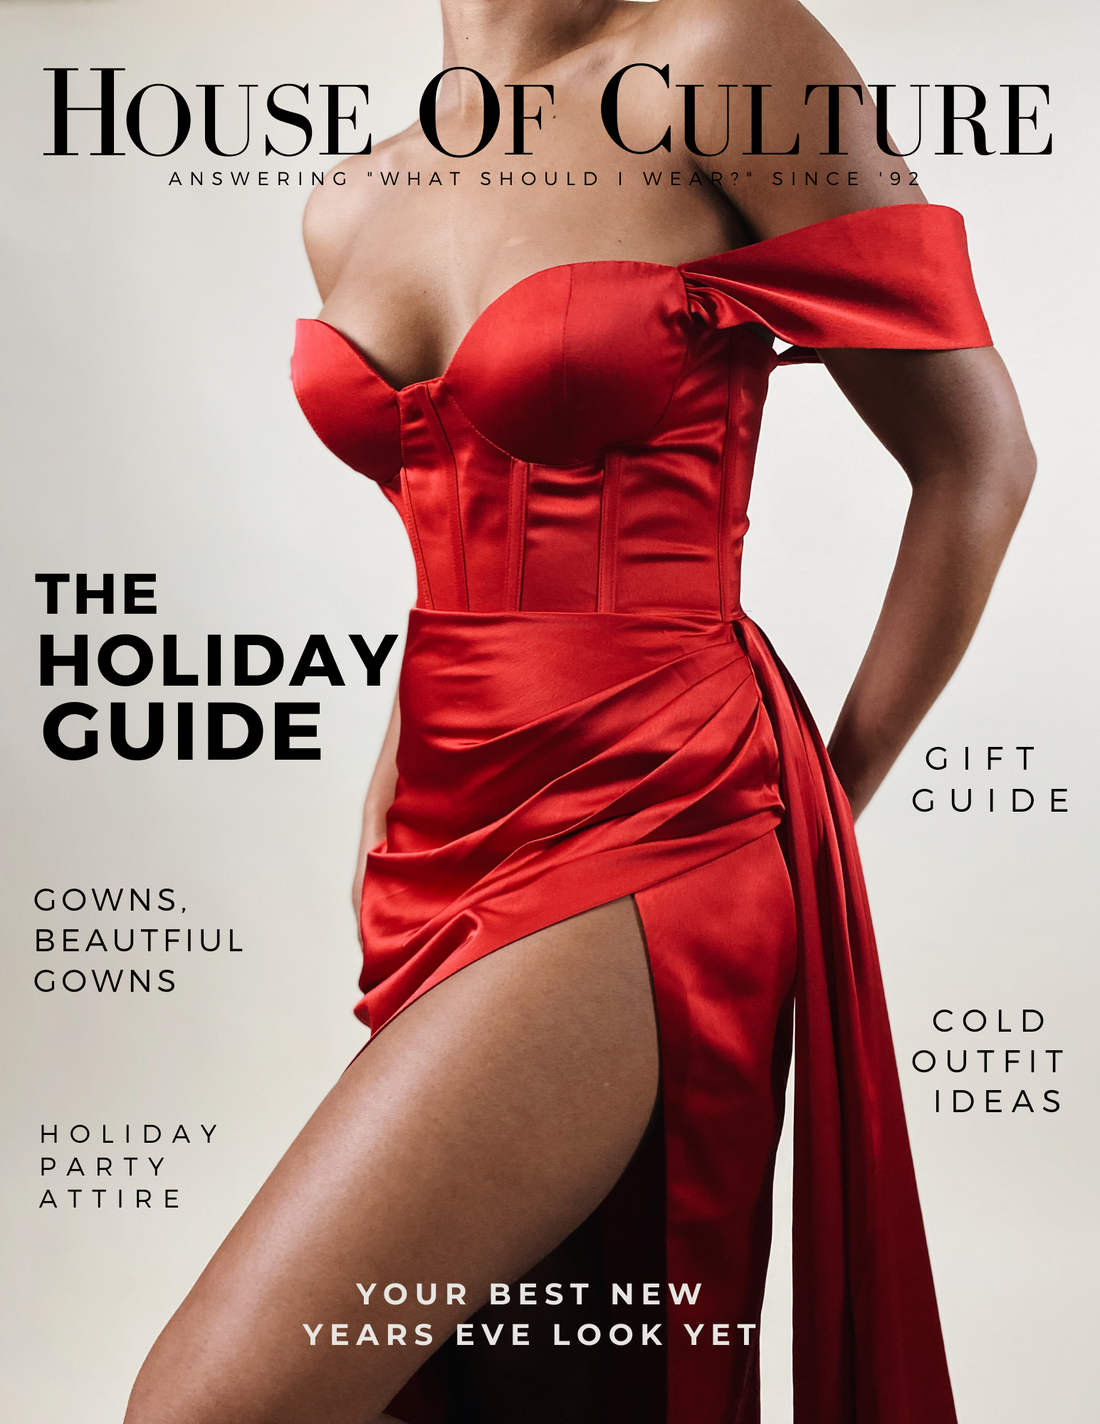 THE HOLIDAY GUIDE